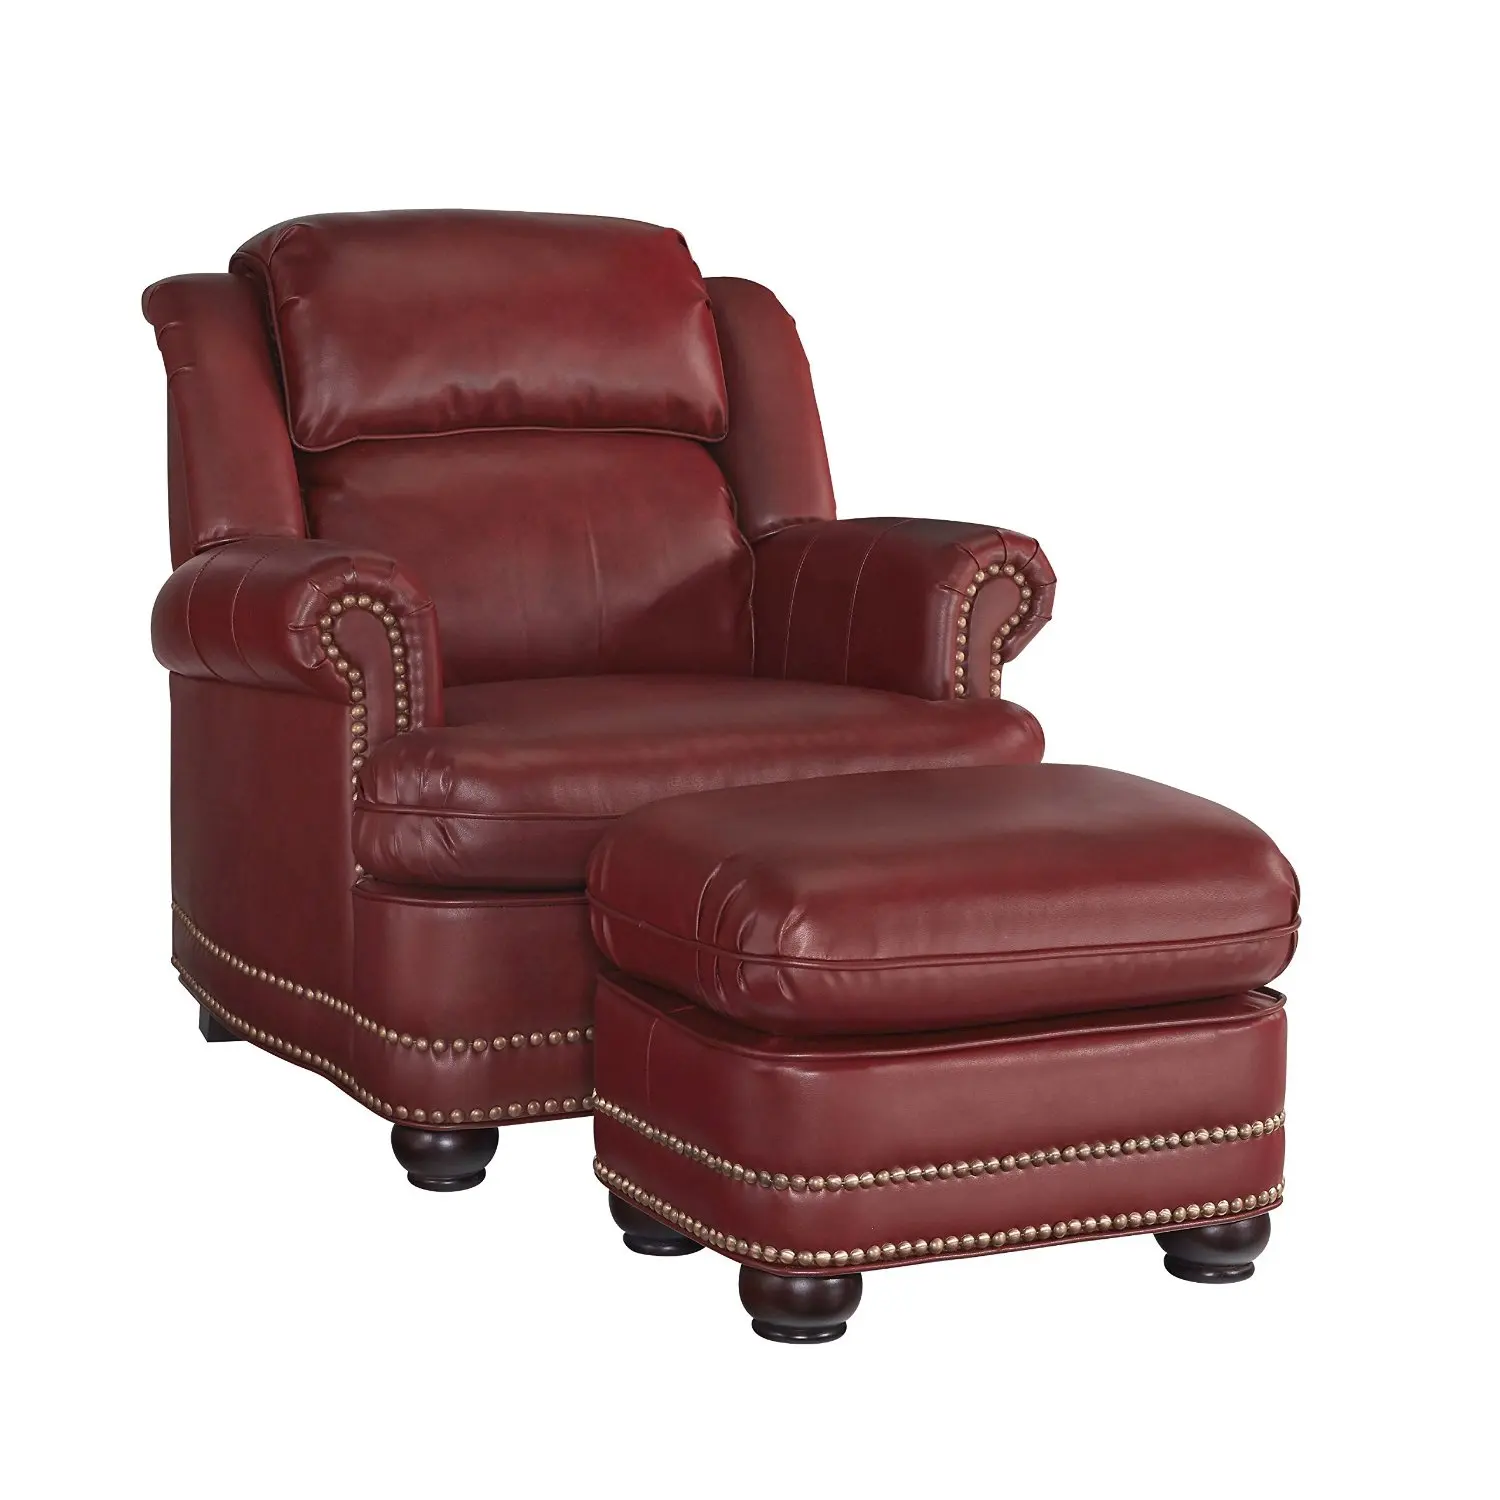 Cheap Gaming Chair Ottoman, find Gaming Chair Ottoman deals on line at